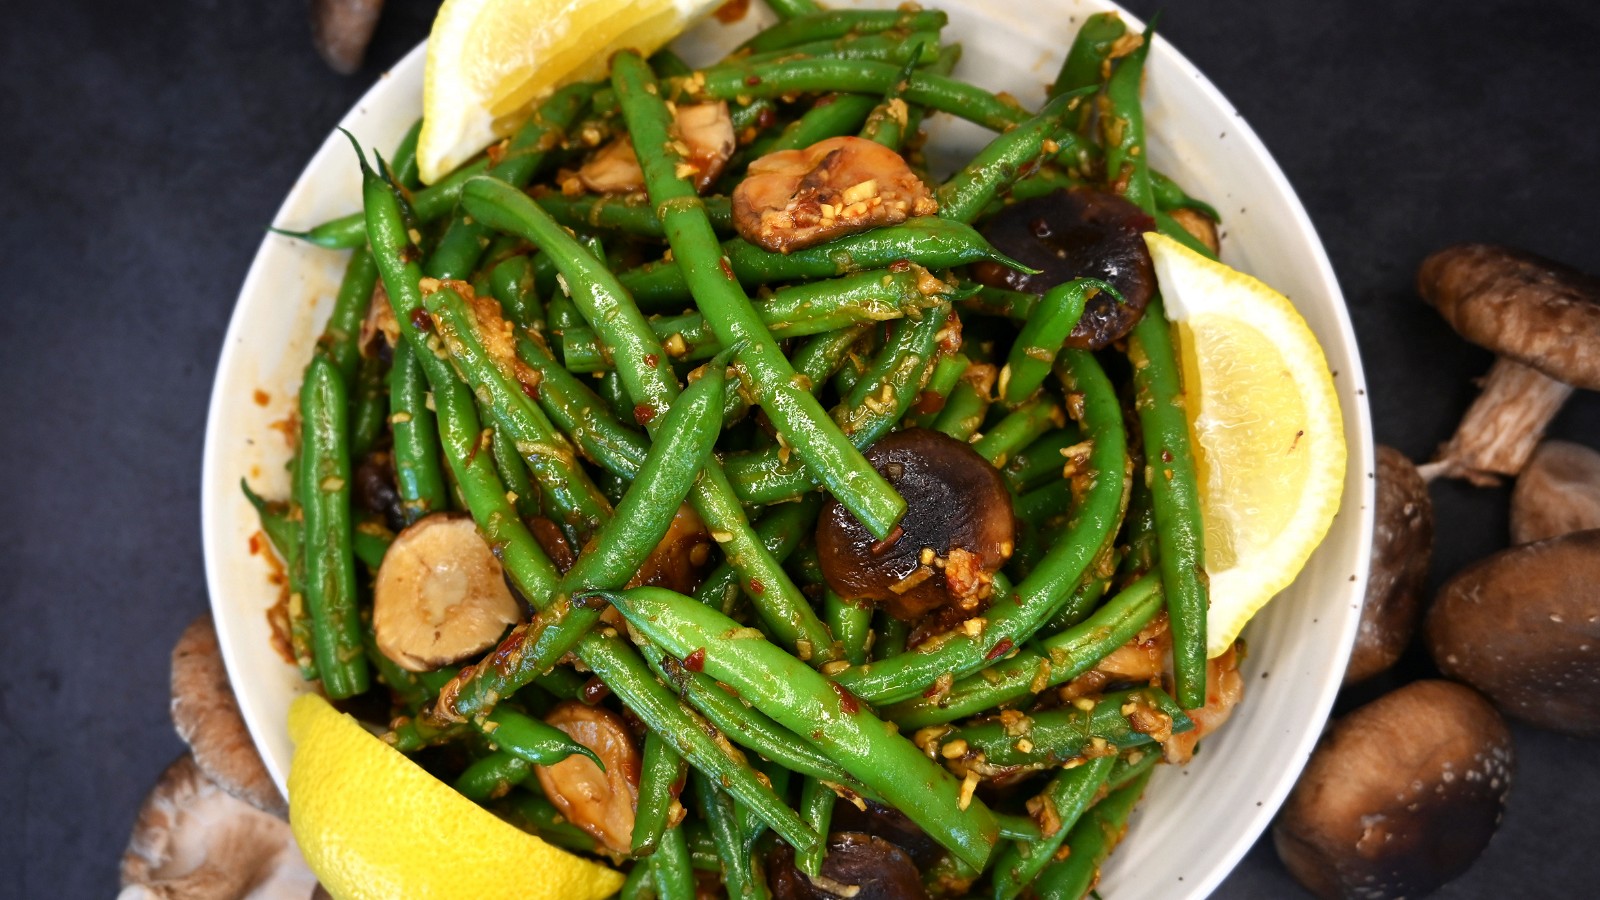 Image of Spicy Asian-style Green Beans with Shiitakes